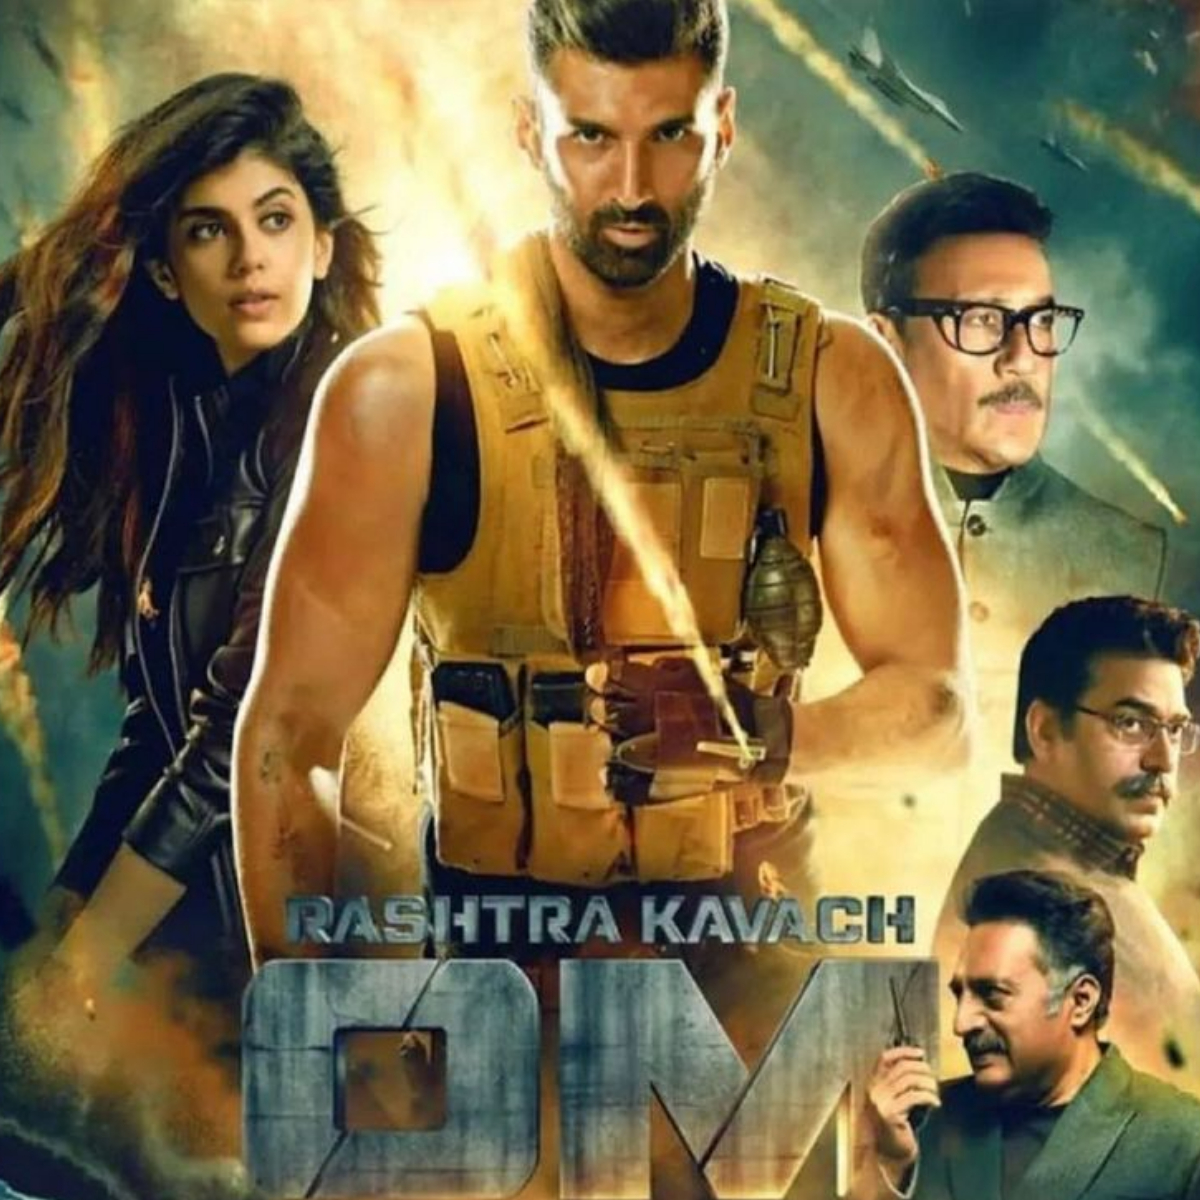 Rashtra Kavach OM Review: Aditya Roy Kapur's well-bronzed biceps cannot carry this half-baked action thriller